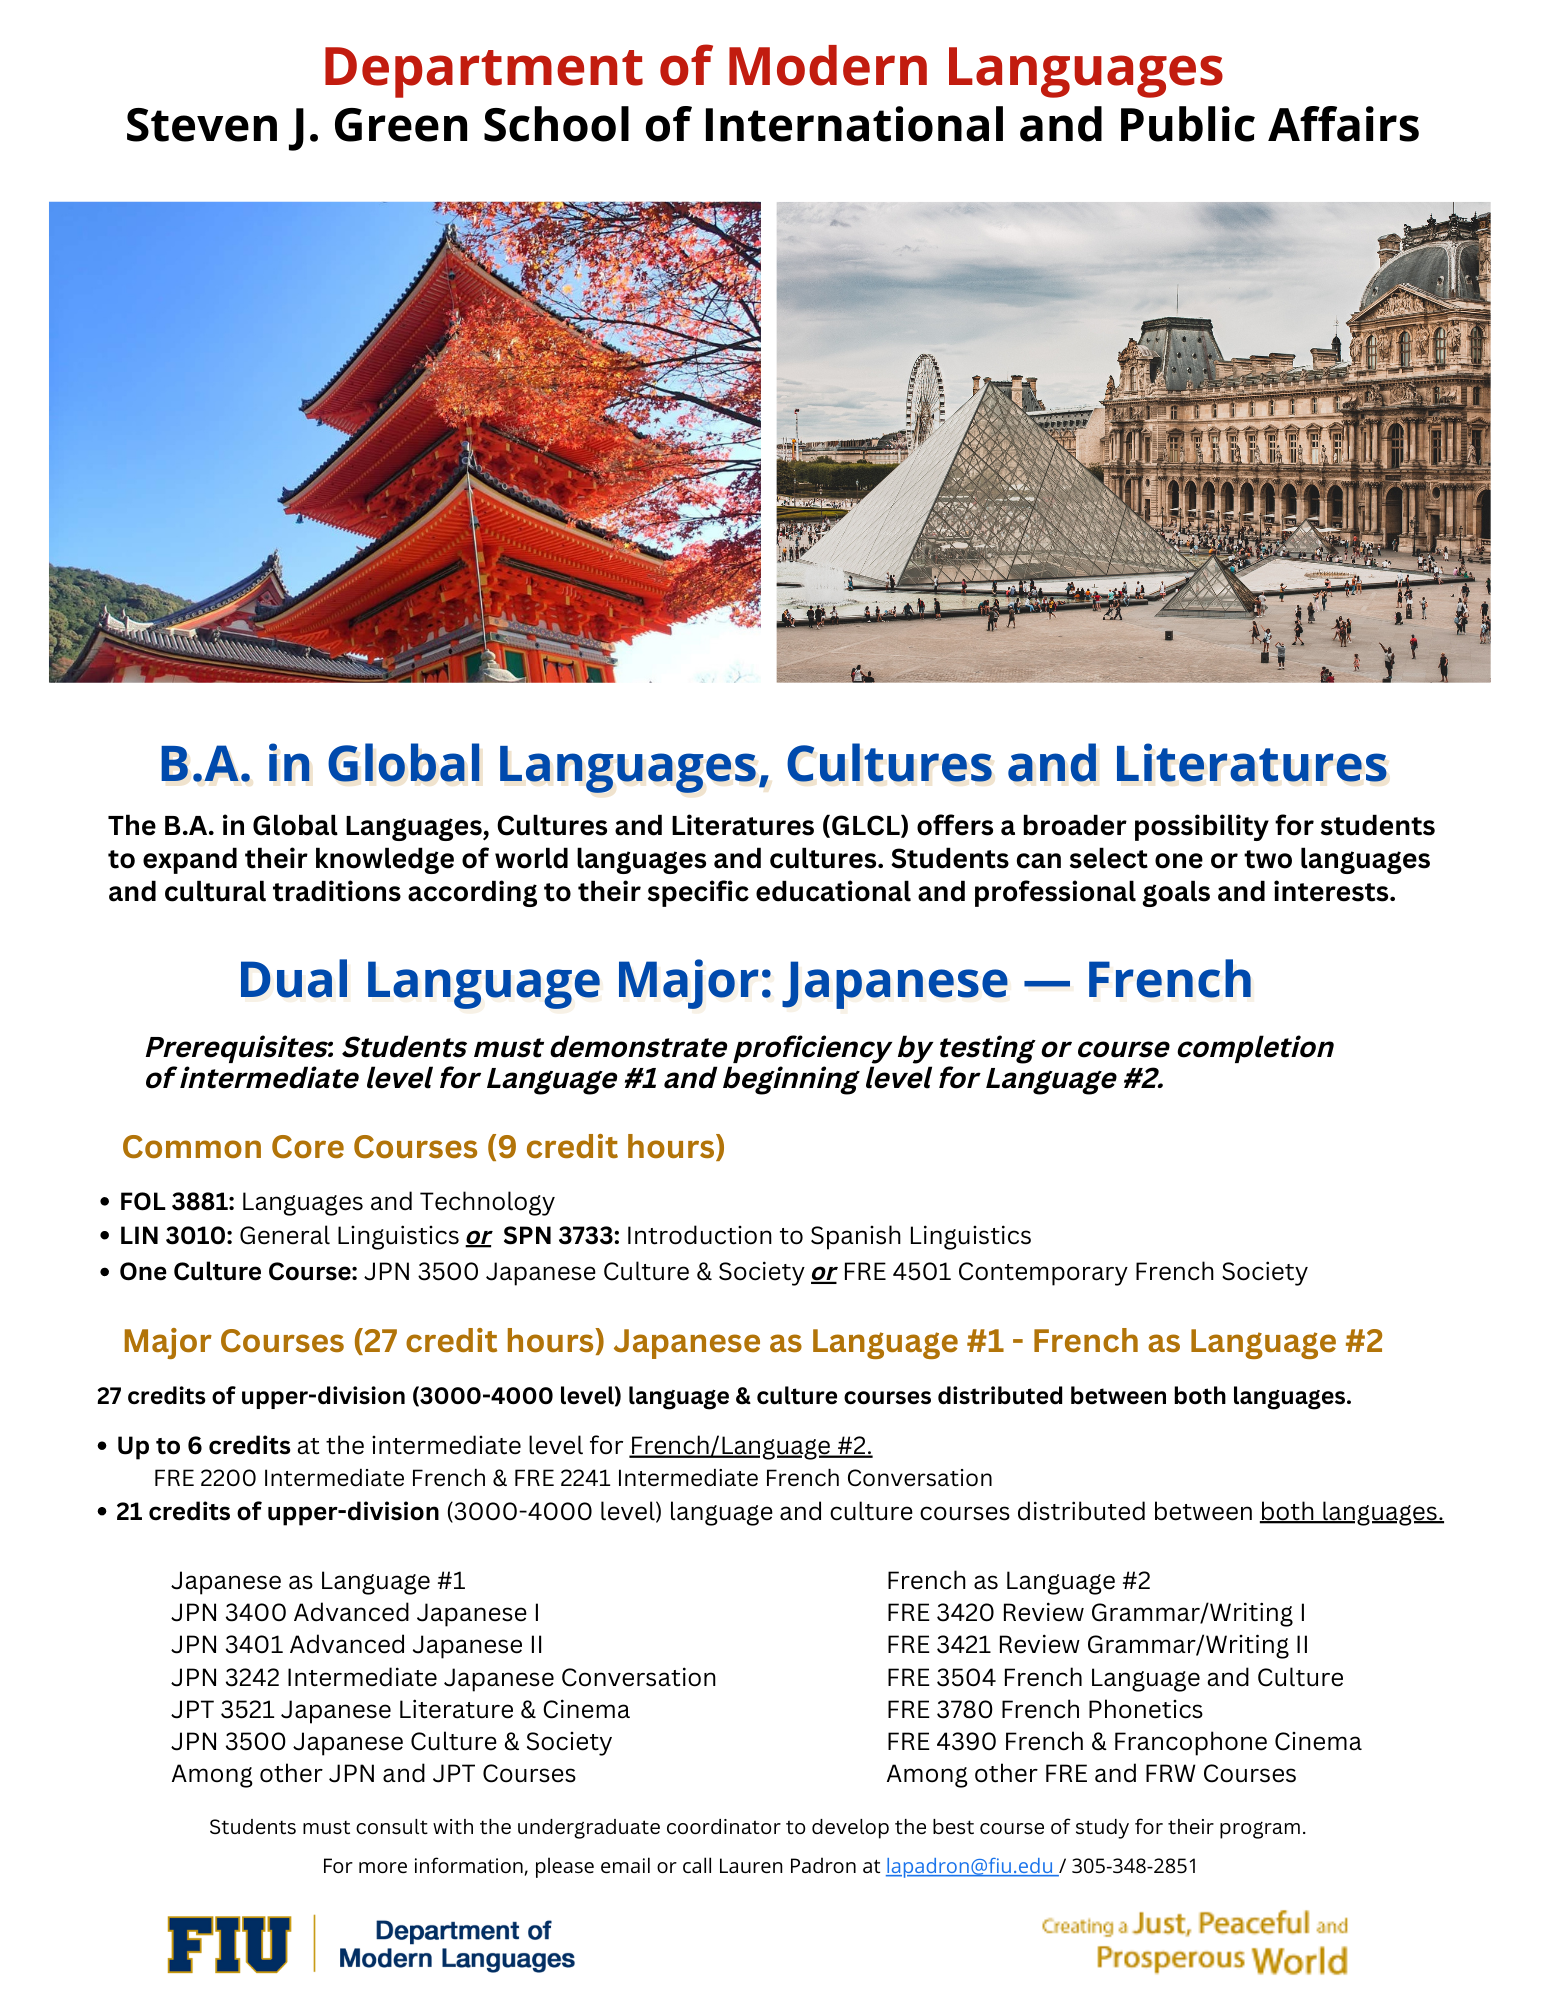 japanesefrench-flyer.png